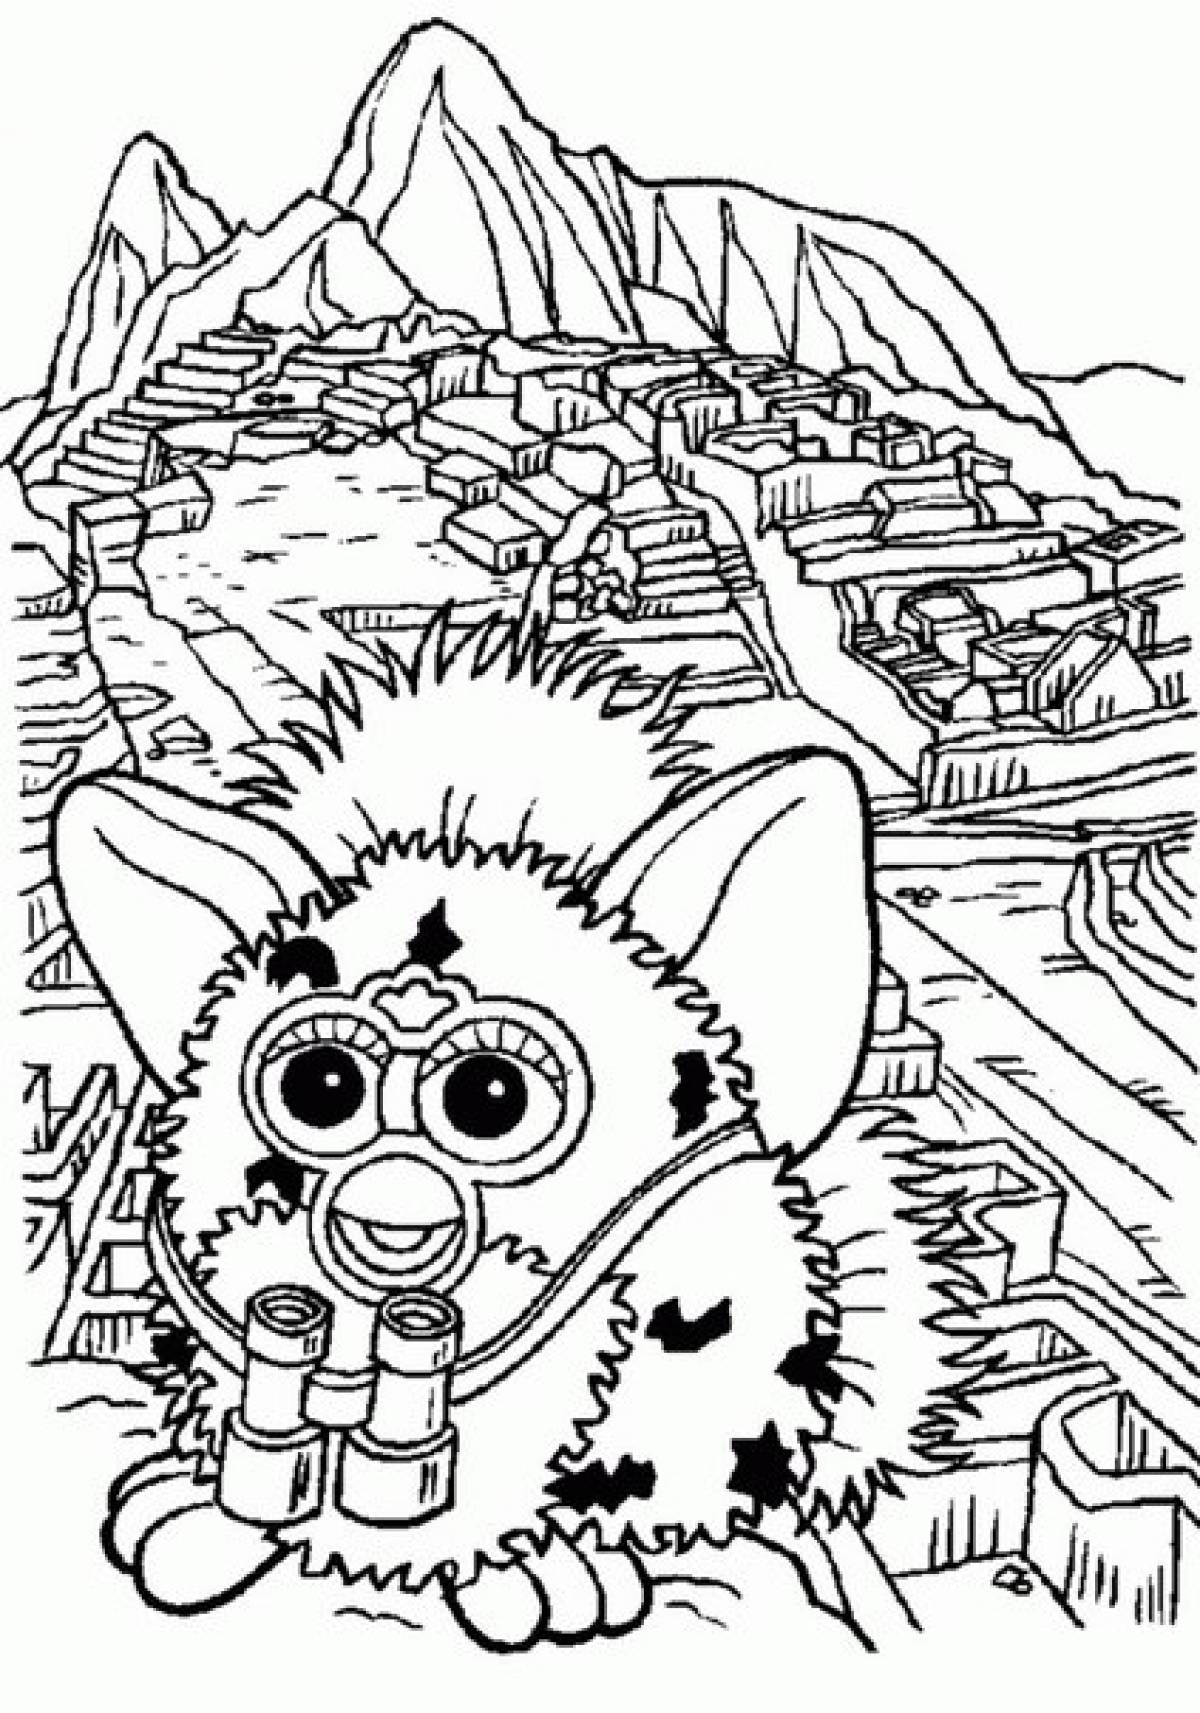 Children's picture of a furby in the mountains